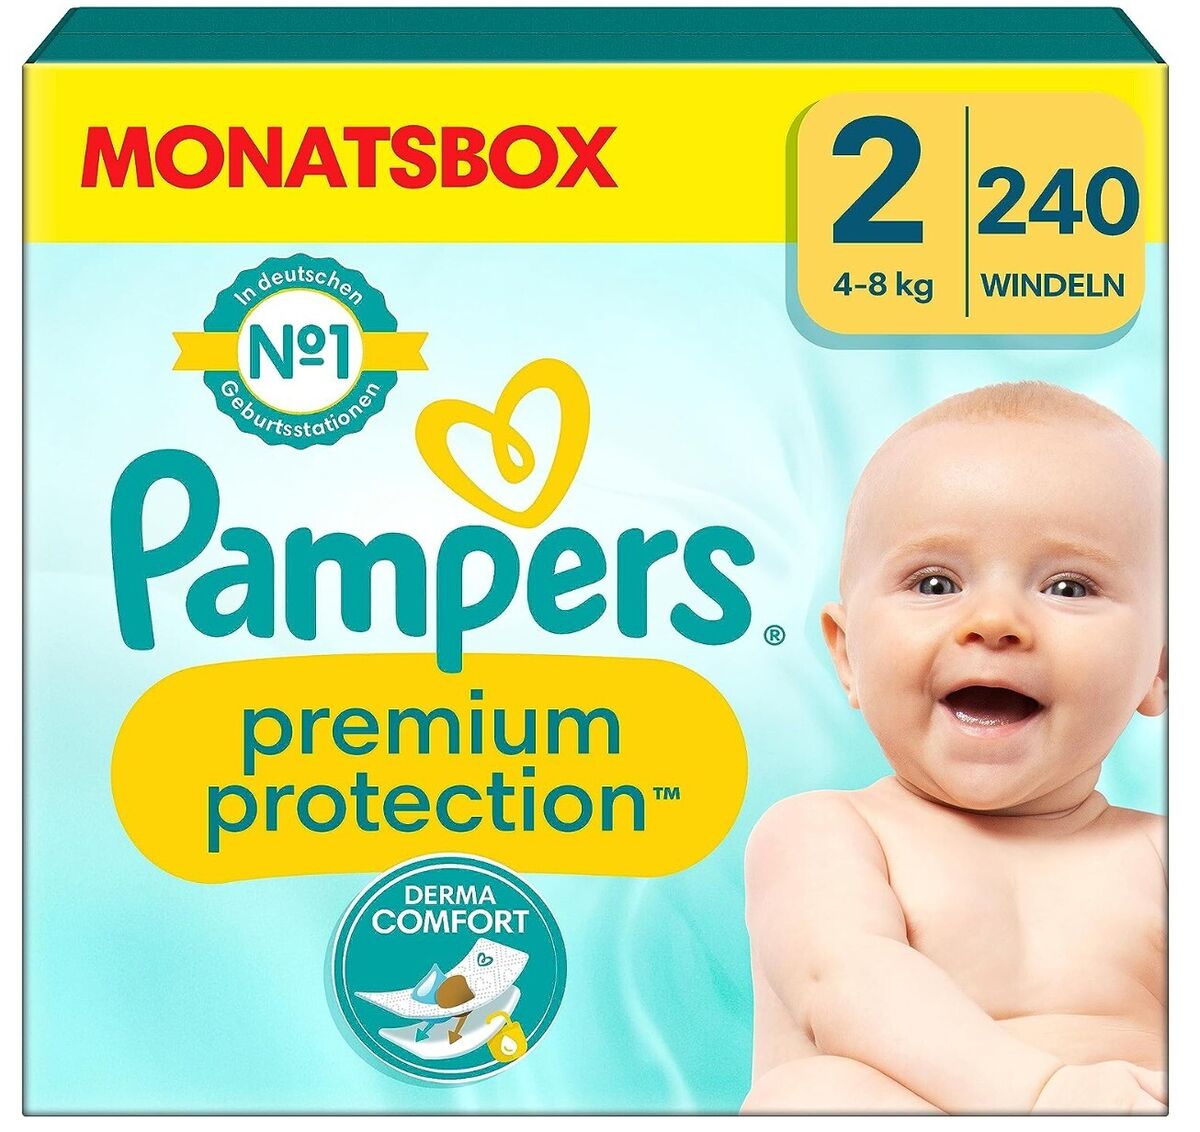 pampers alle